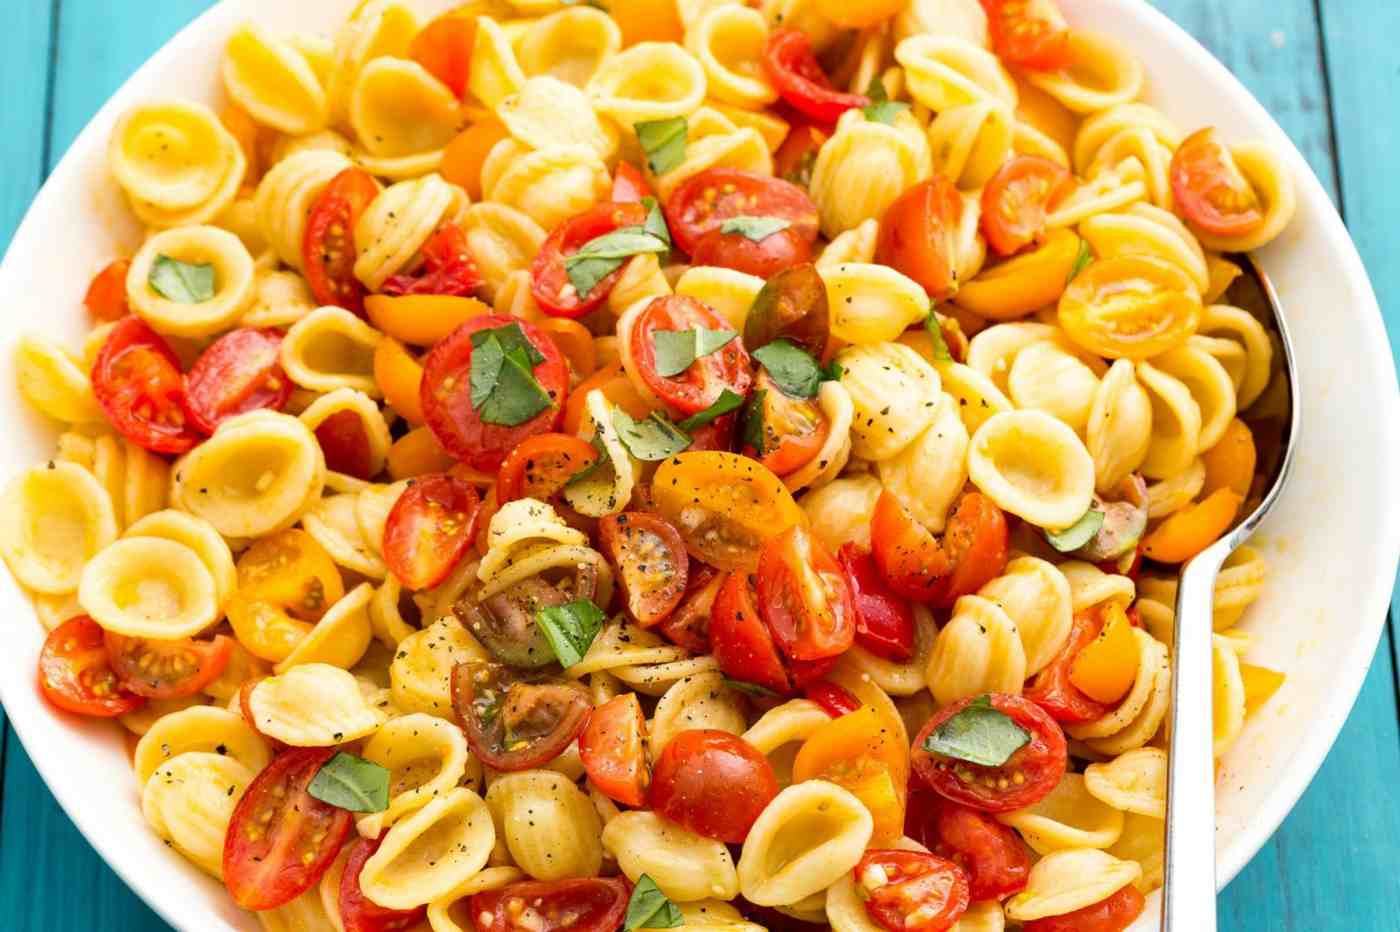 Bruschetta Salad with Pasta and Tomatoes for a Smooth and Satisfactory Appearance